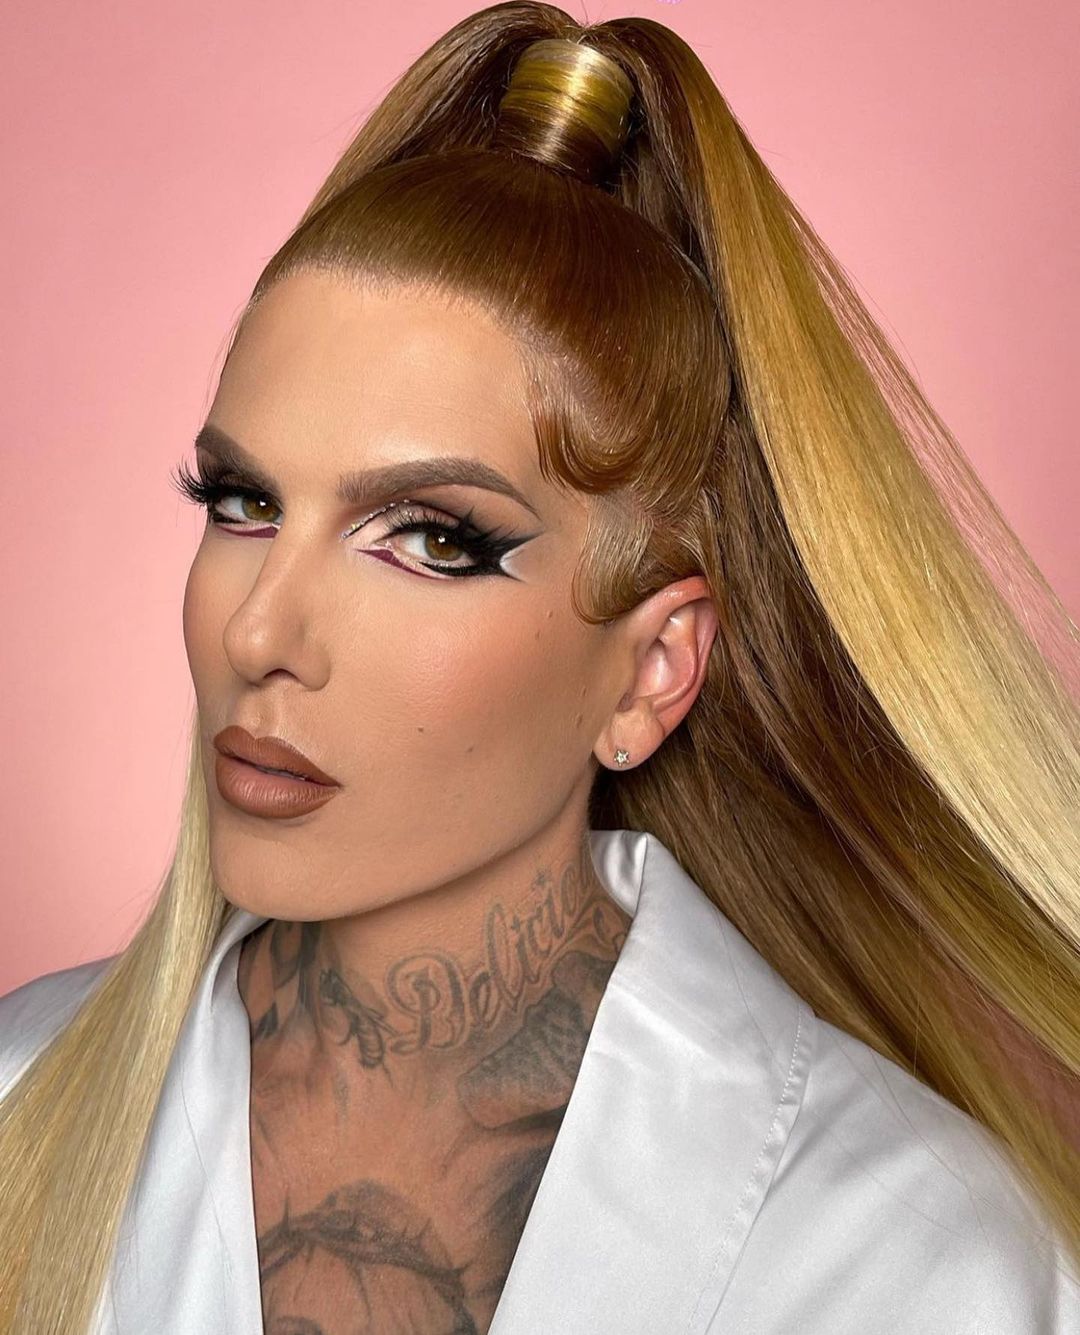 Jeffree Star has been asked about his gender since he was a child.